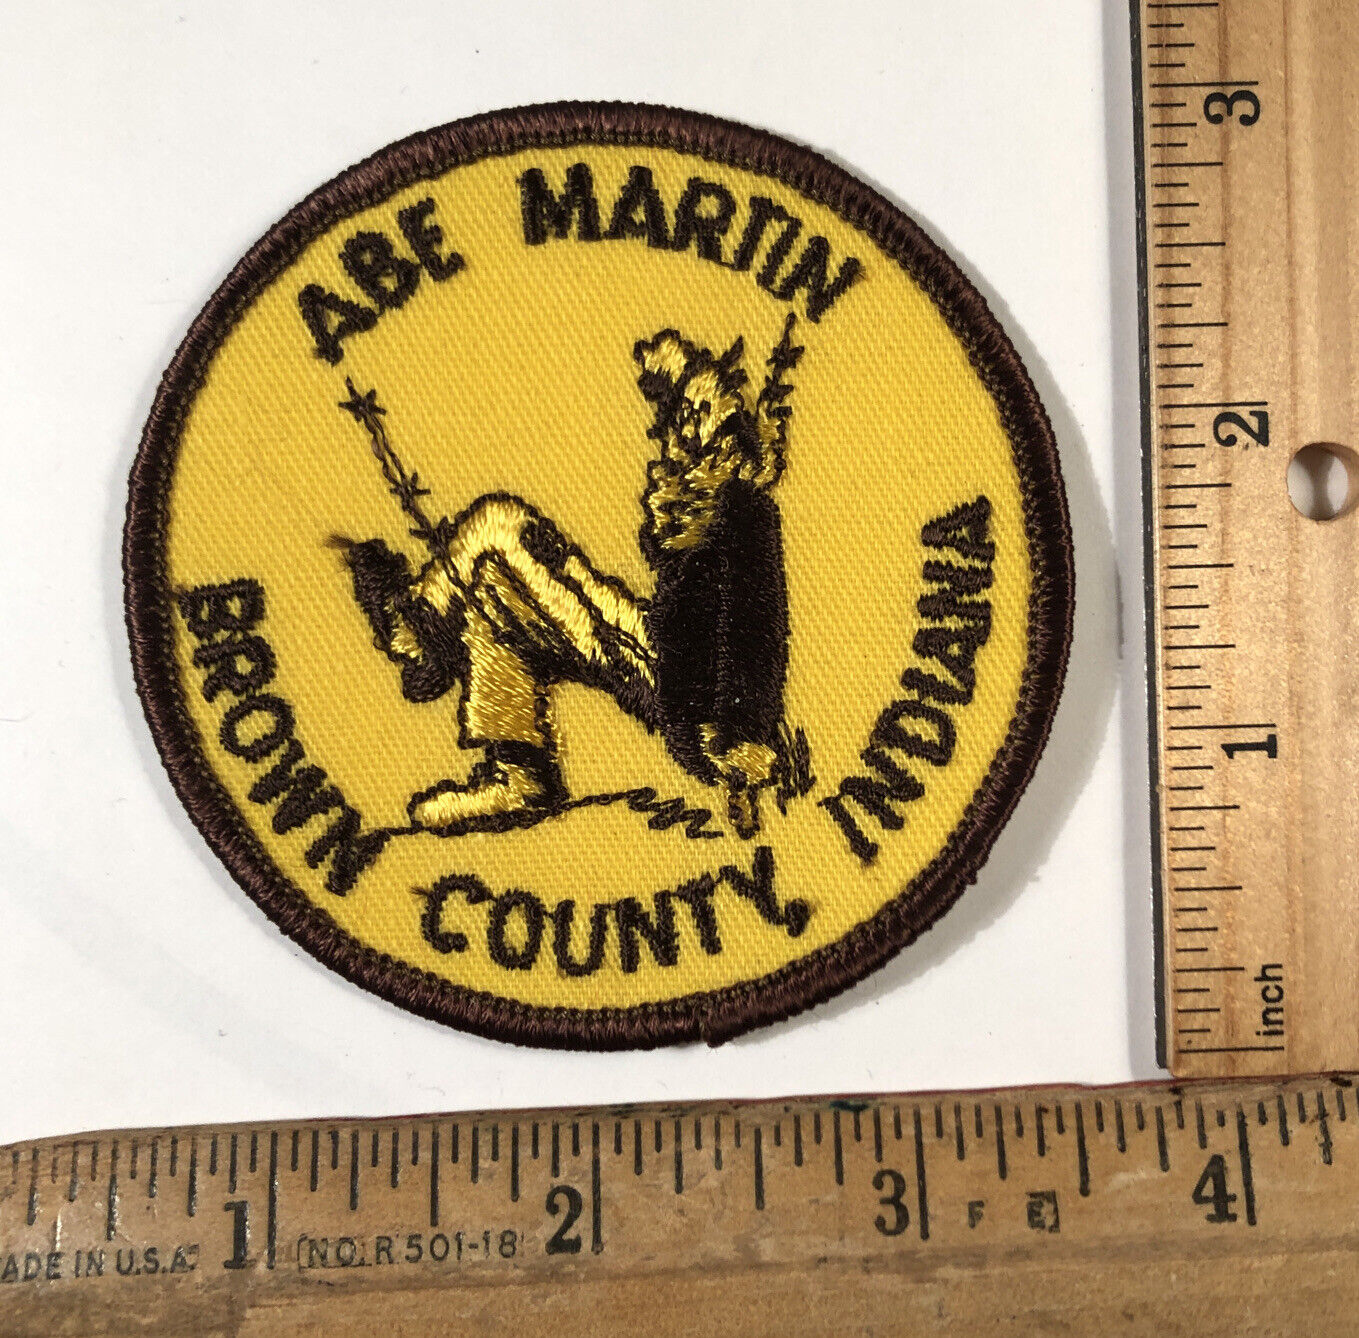 Vintage Abe Martin Brown County Indiana Voyager Patch Travel Souvenir